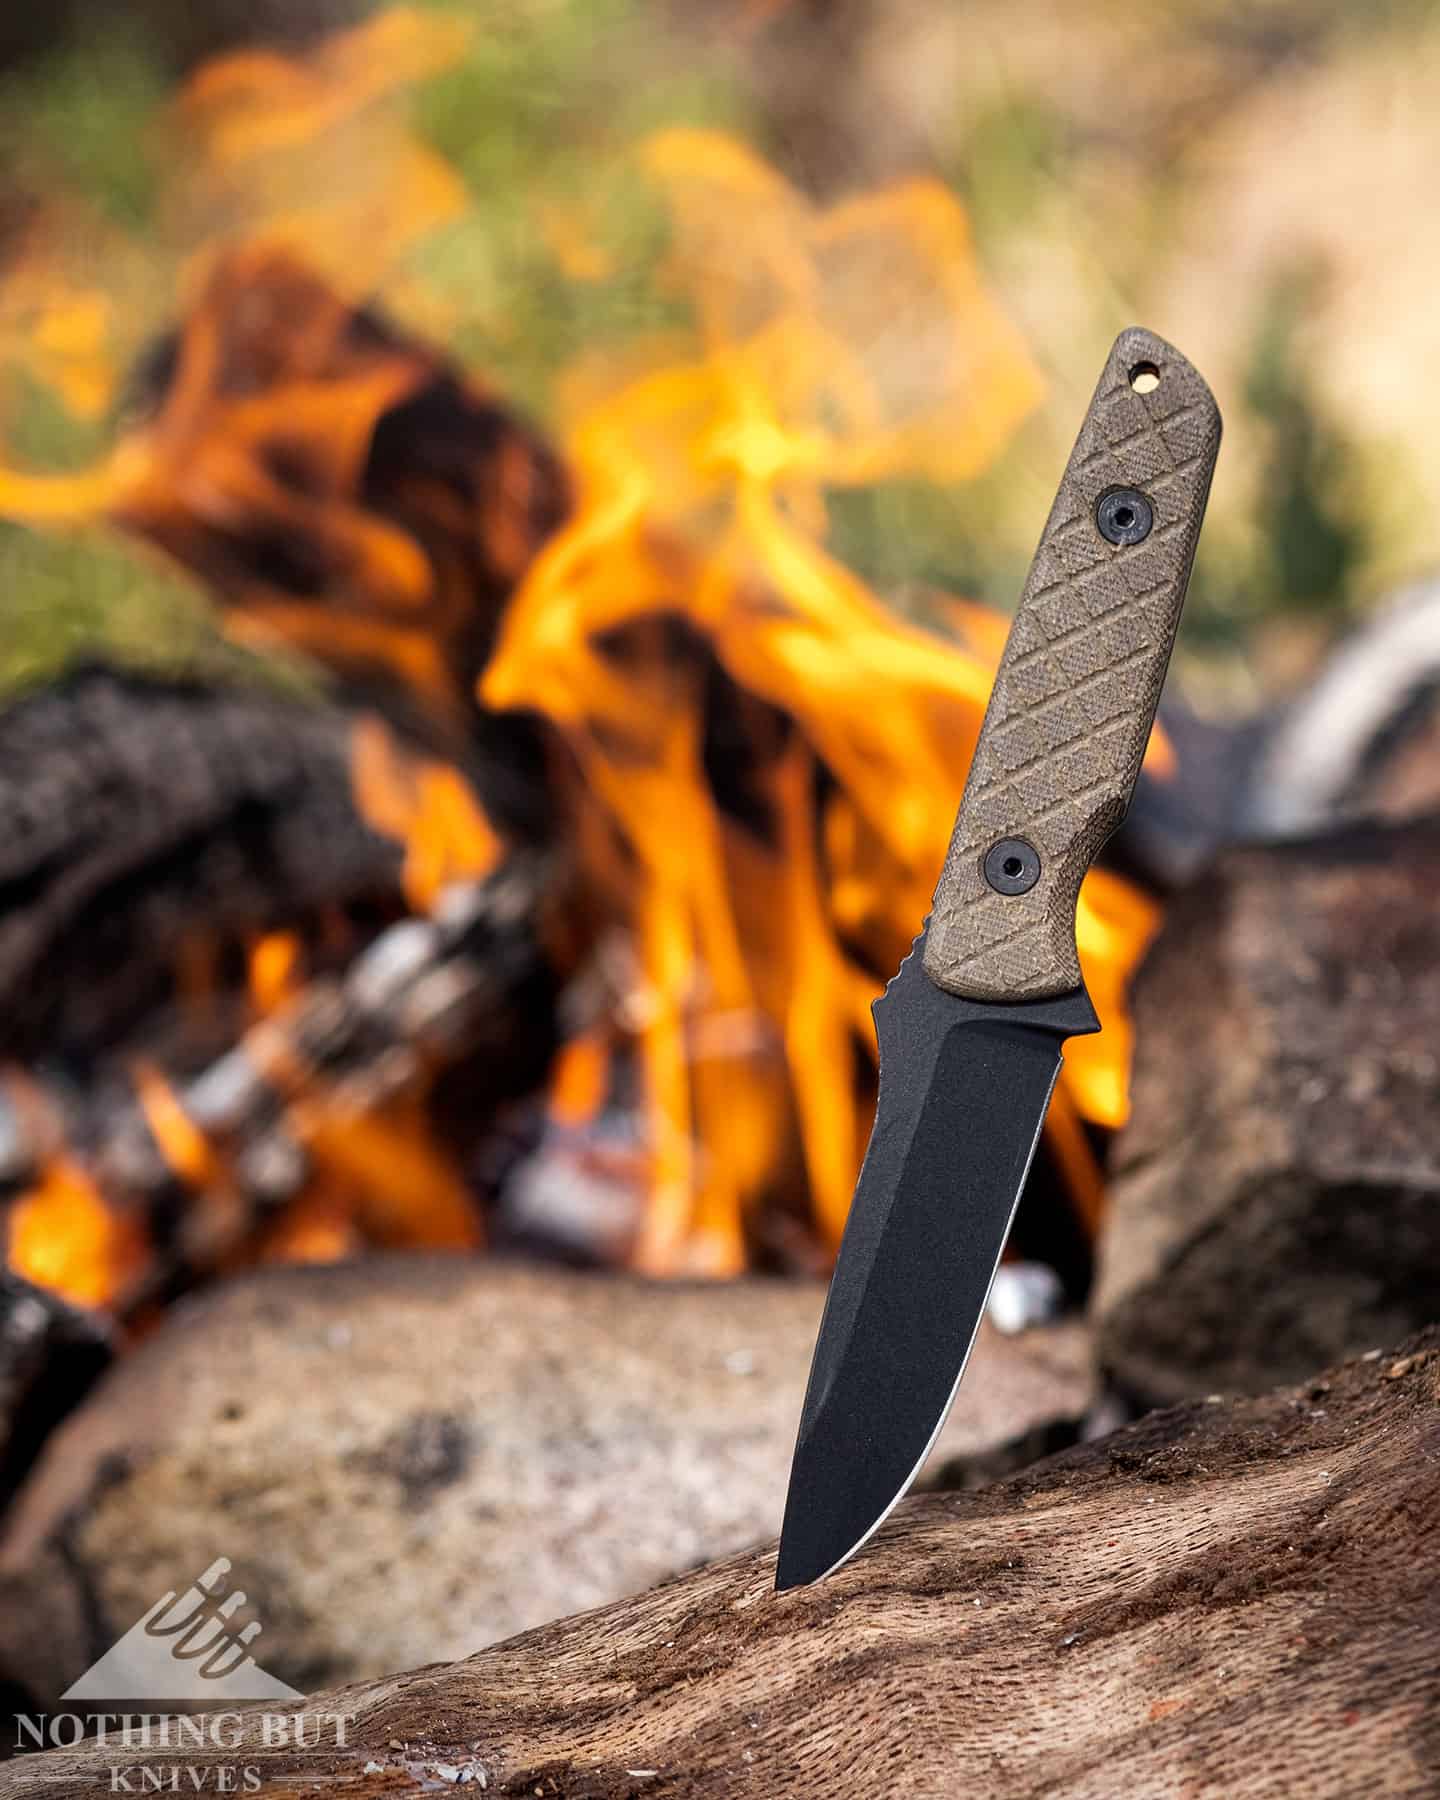 The rugged Spartan Blades Alala is a great budget option for anyone looking for a small survival or camping knife. 